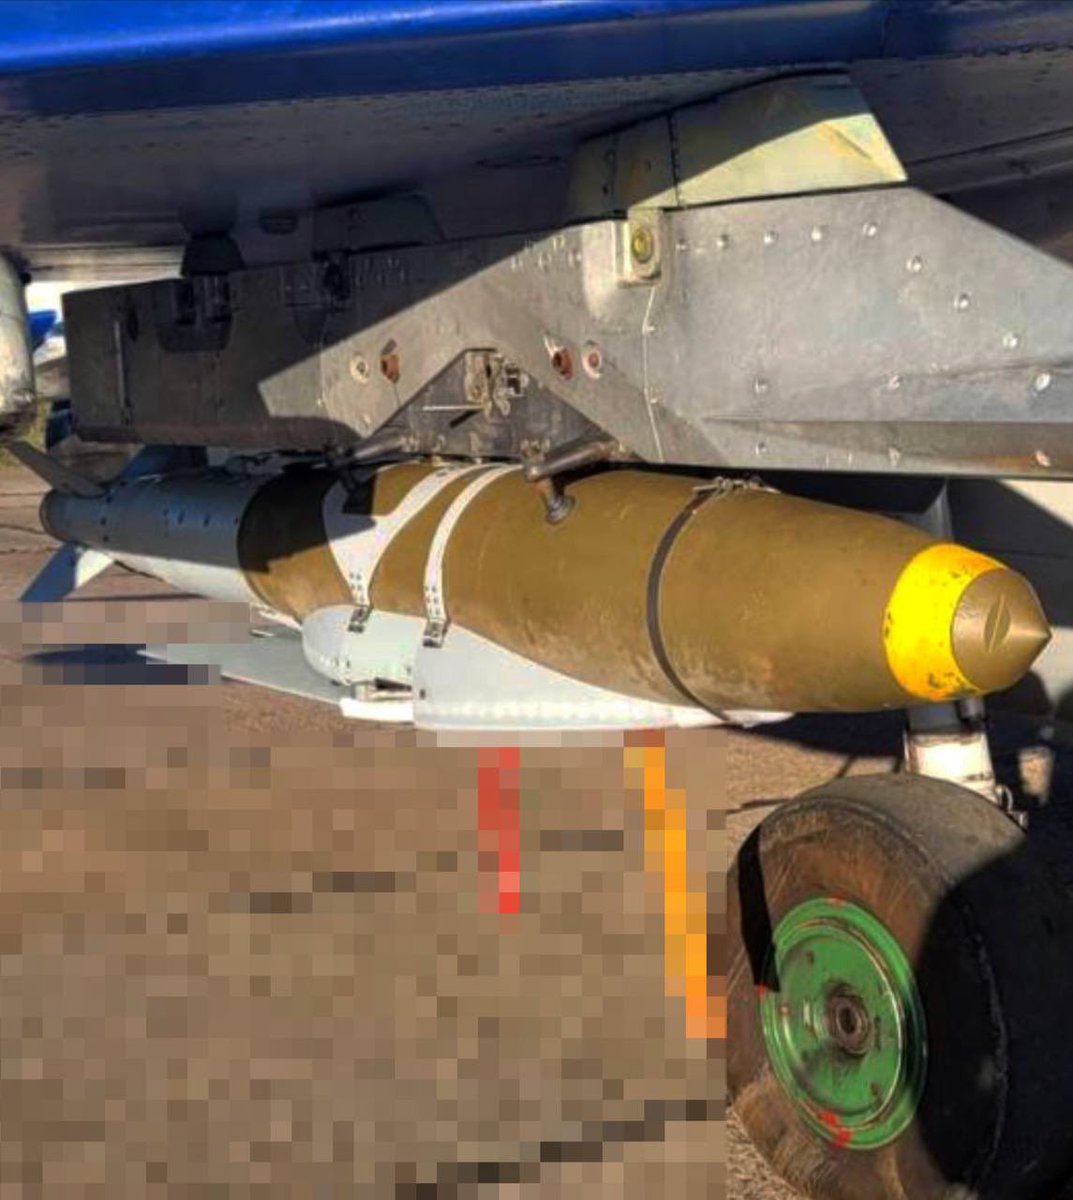 US-supplied JDAM-ER extended range glide bomb in Ukrainian service, seen here on a highly modified MiG-29 Fulcrum weapons station.